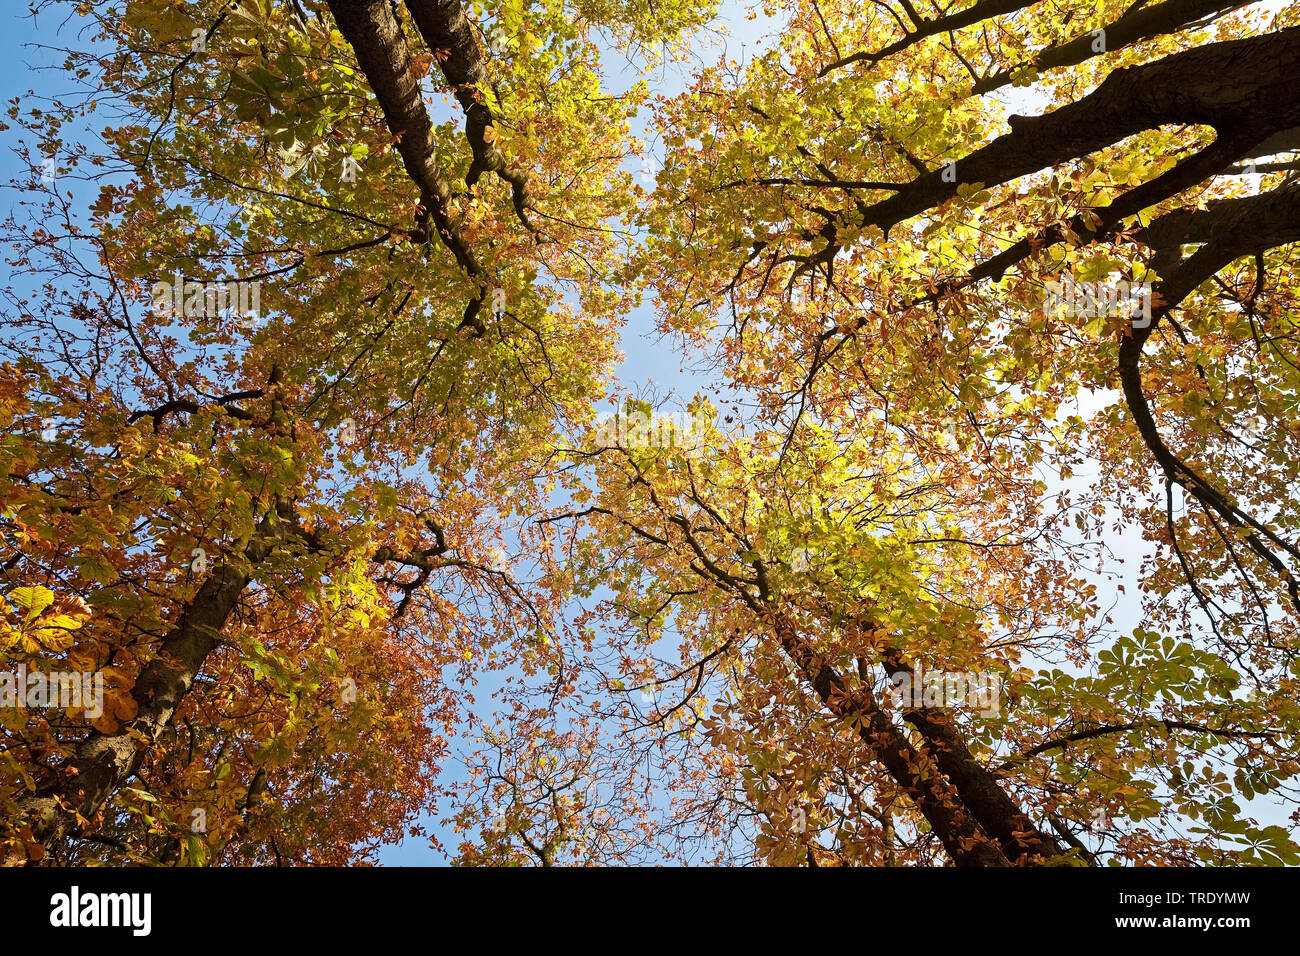 common horse chestnut (Aesculus hippocastanum), looking up to autumnal trees, Germany, North Rhine-Westphalia Stock Photo